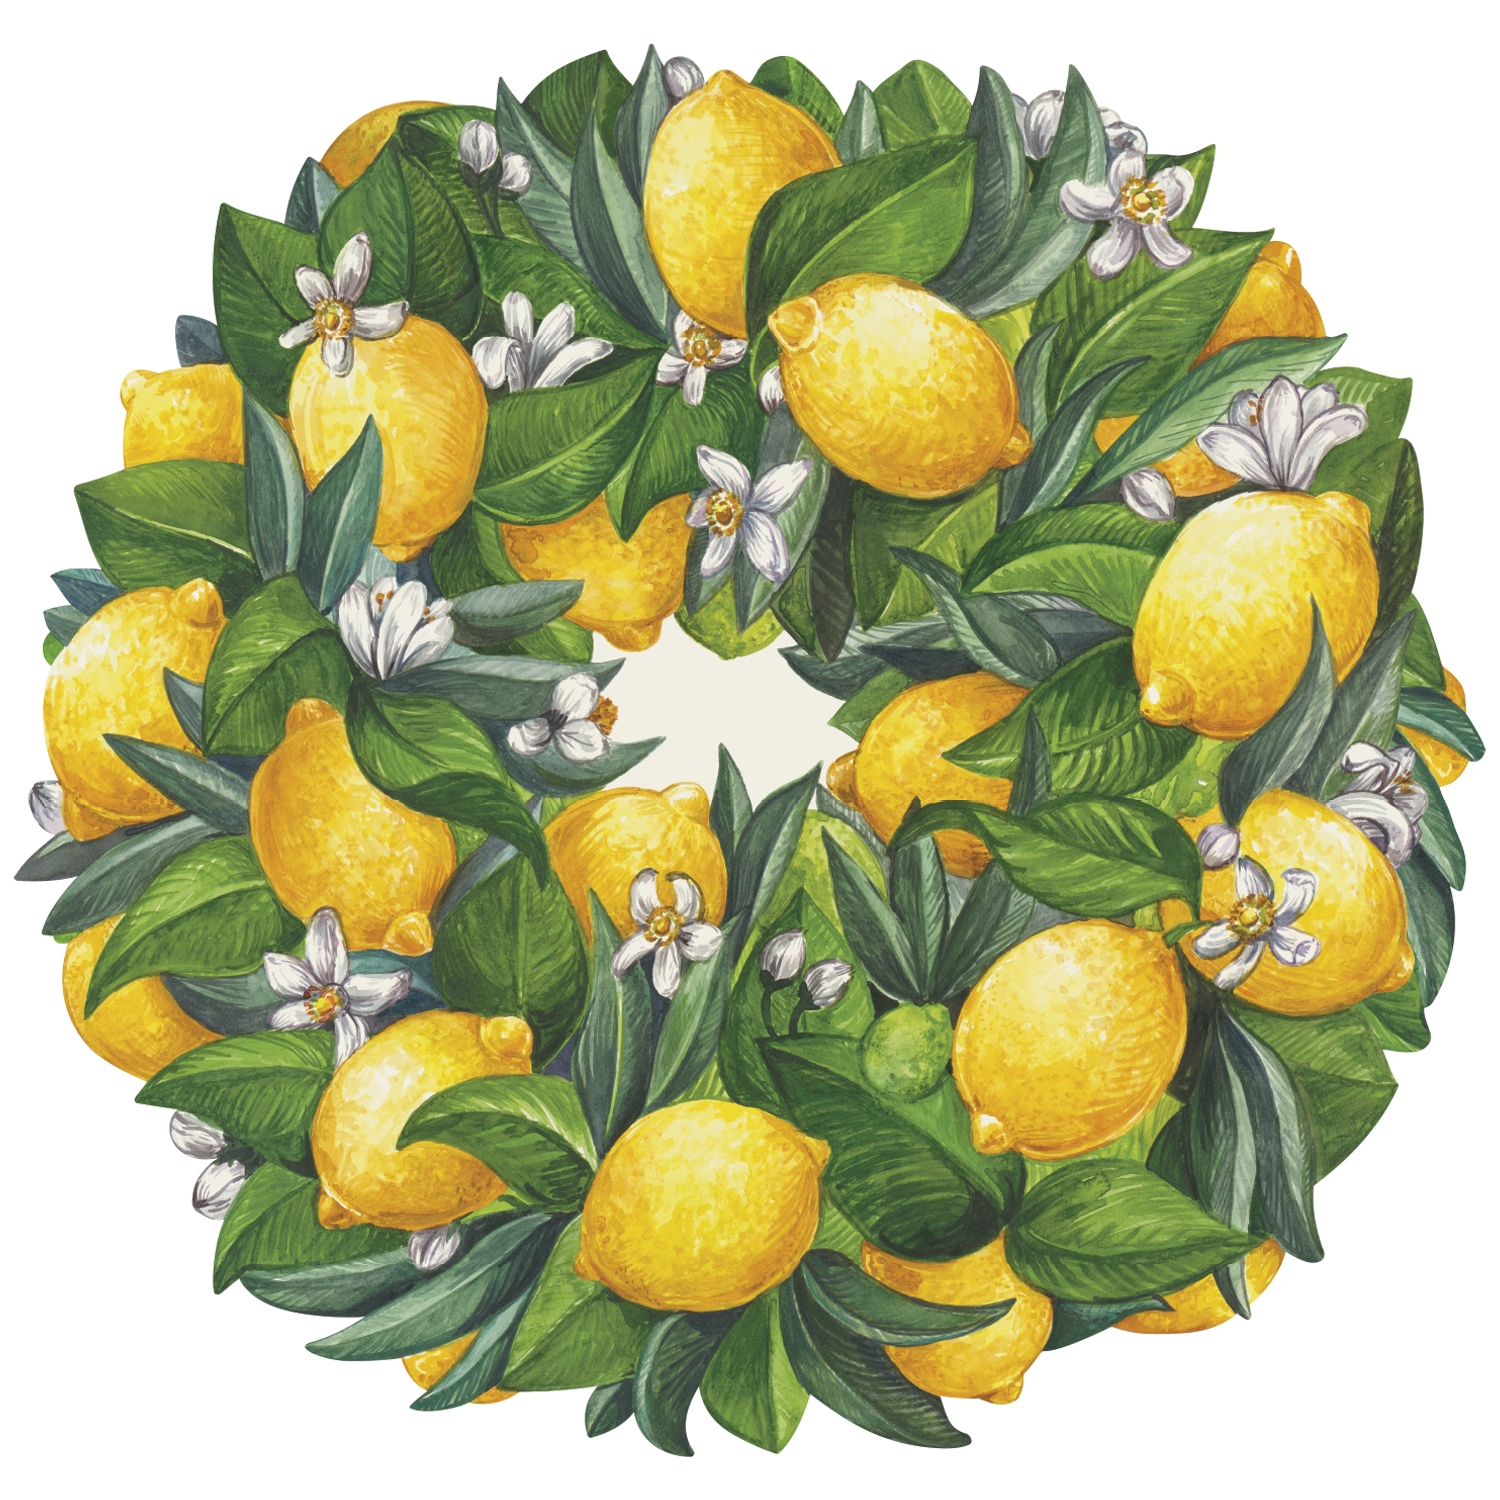 This bright and welcoming wreath of lemons  makes a sunny addition to tablescapes 